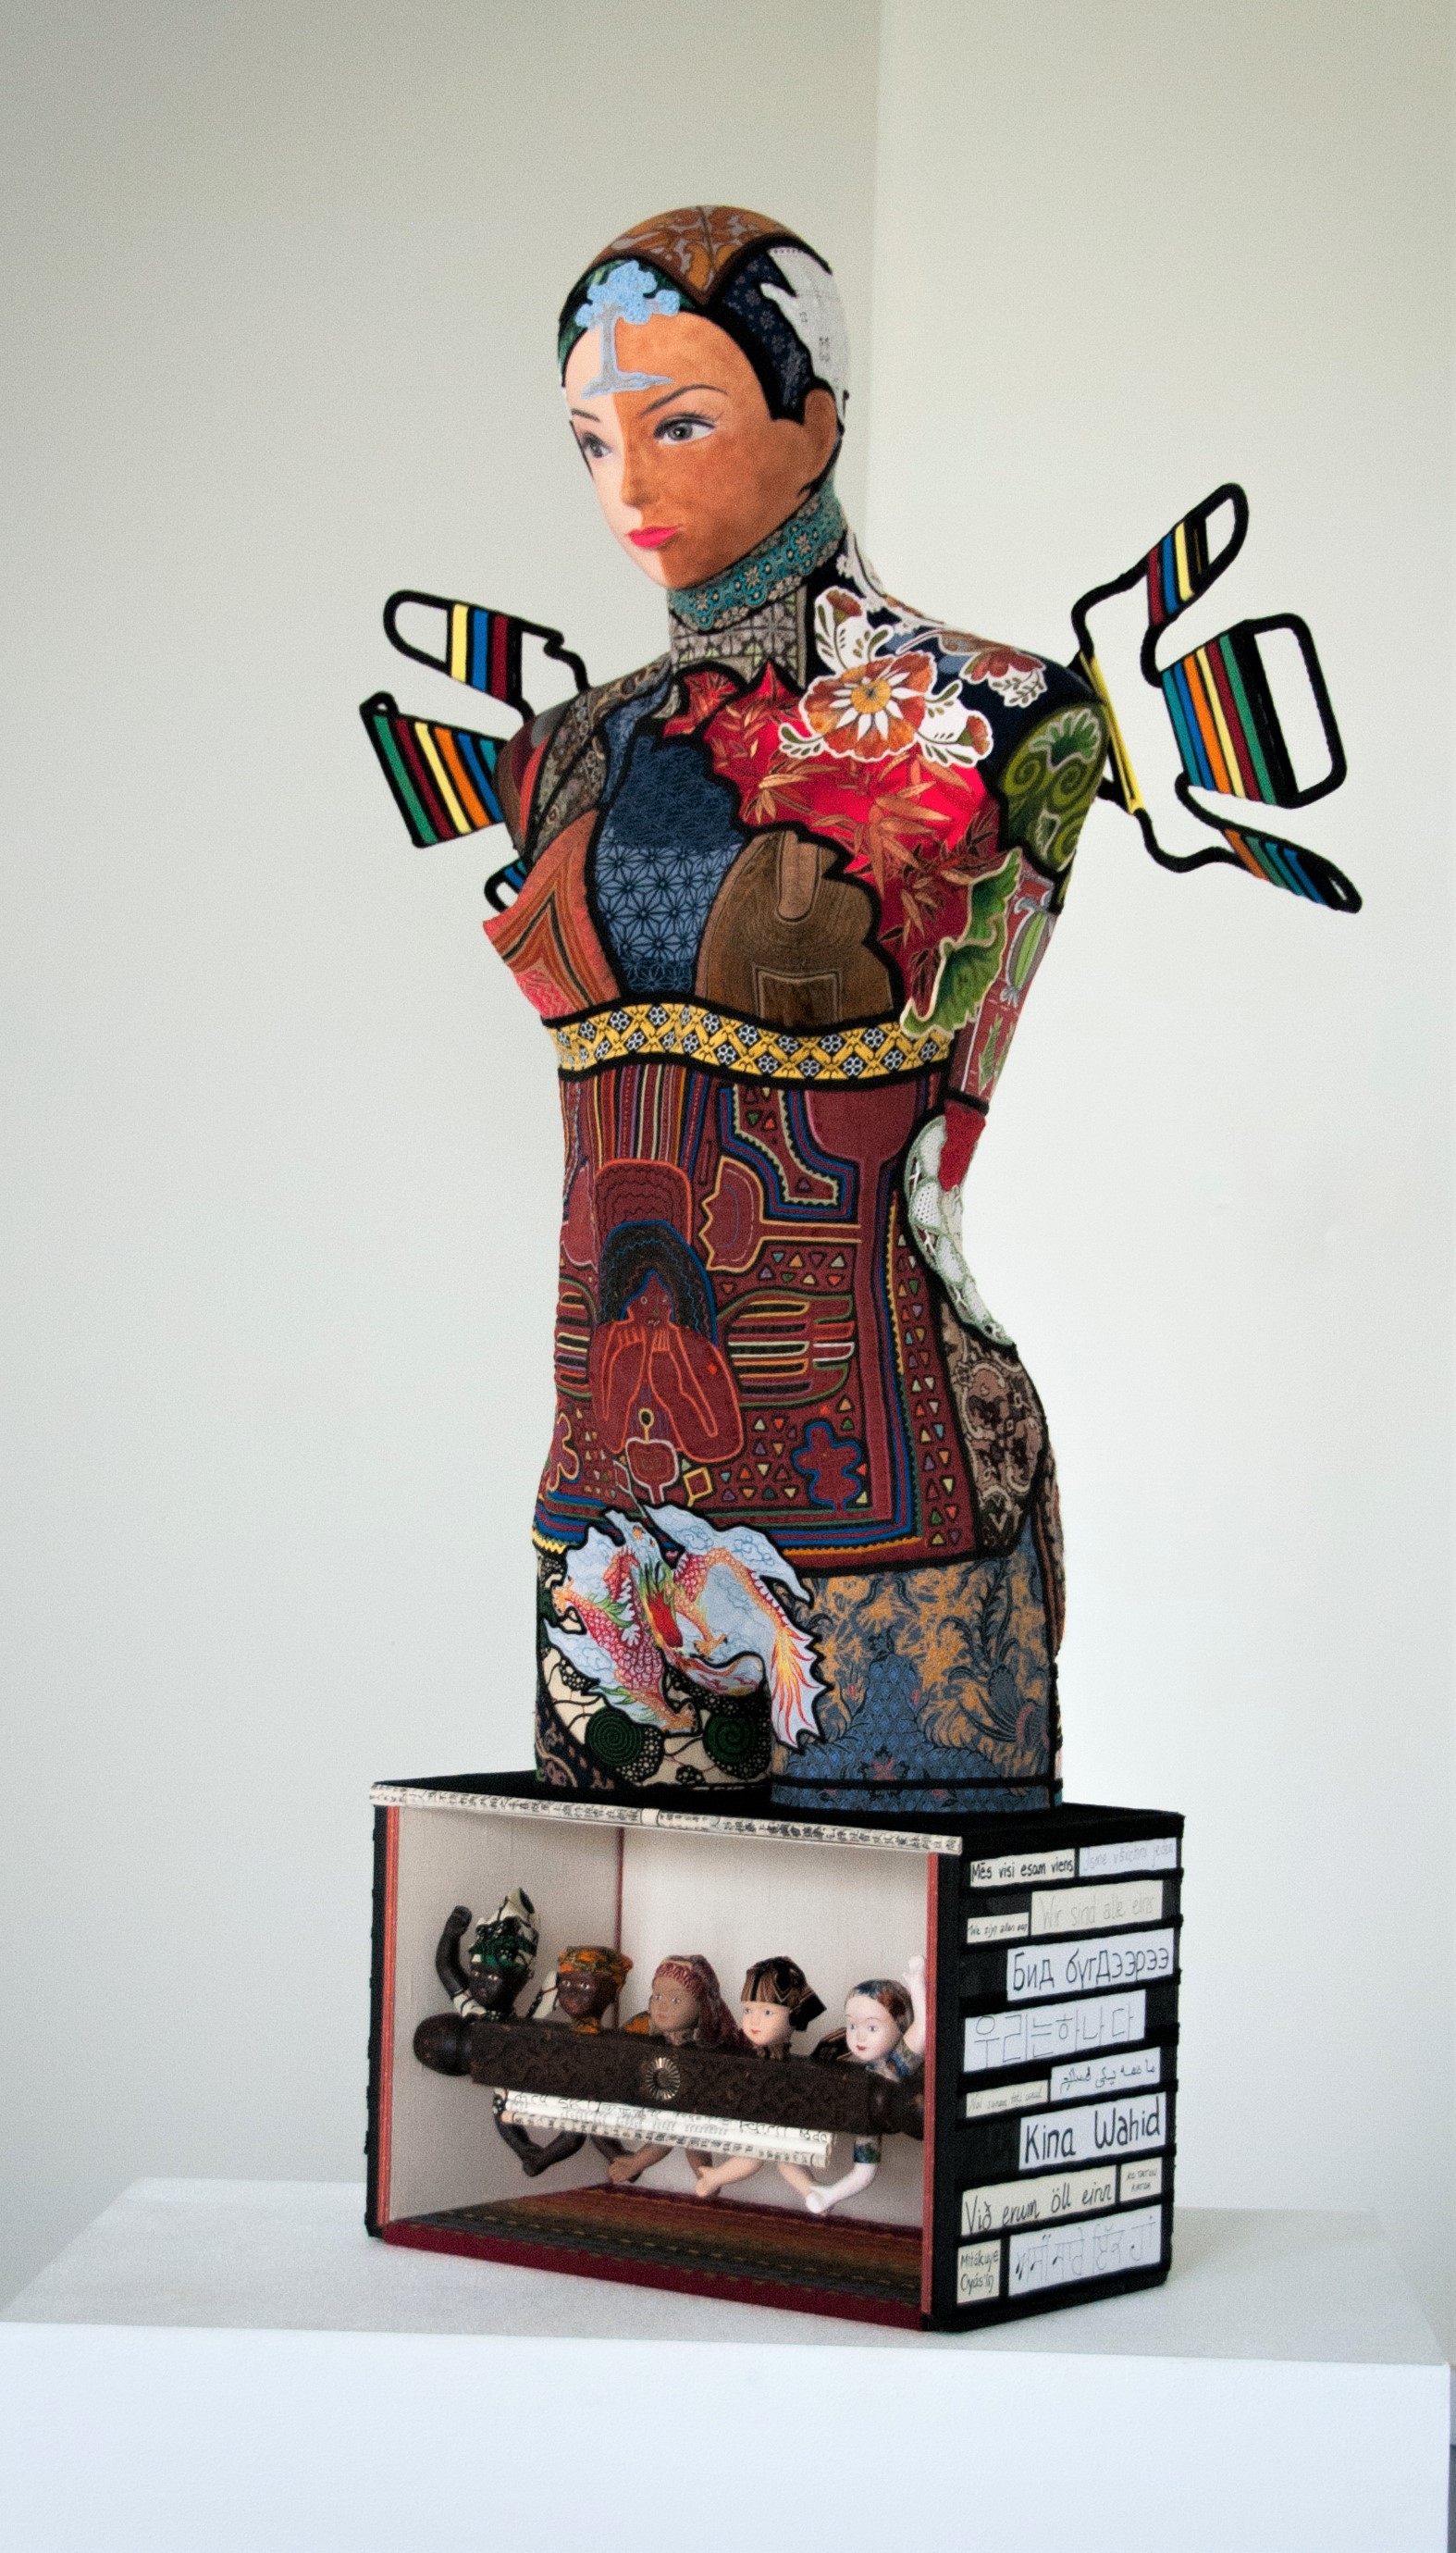 "We are One" sculpture by Libby Bloxham. A mannequin of a woman is covered in a patchwork of recycled textiles suggesting different cultures and styles. The mannequin lacks arms and legs but has wings also formed from the textiles. The base of the sculpture is a box containing the upper bodies of various small dolls depicting a spectrum of ethnicities.